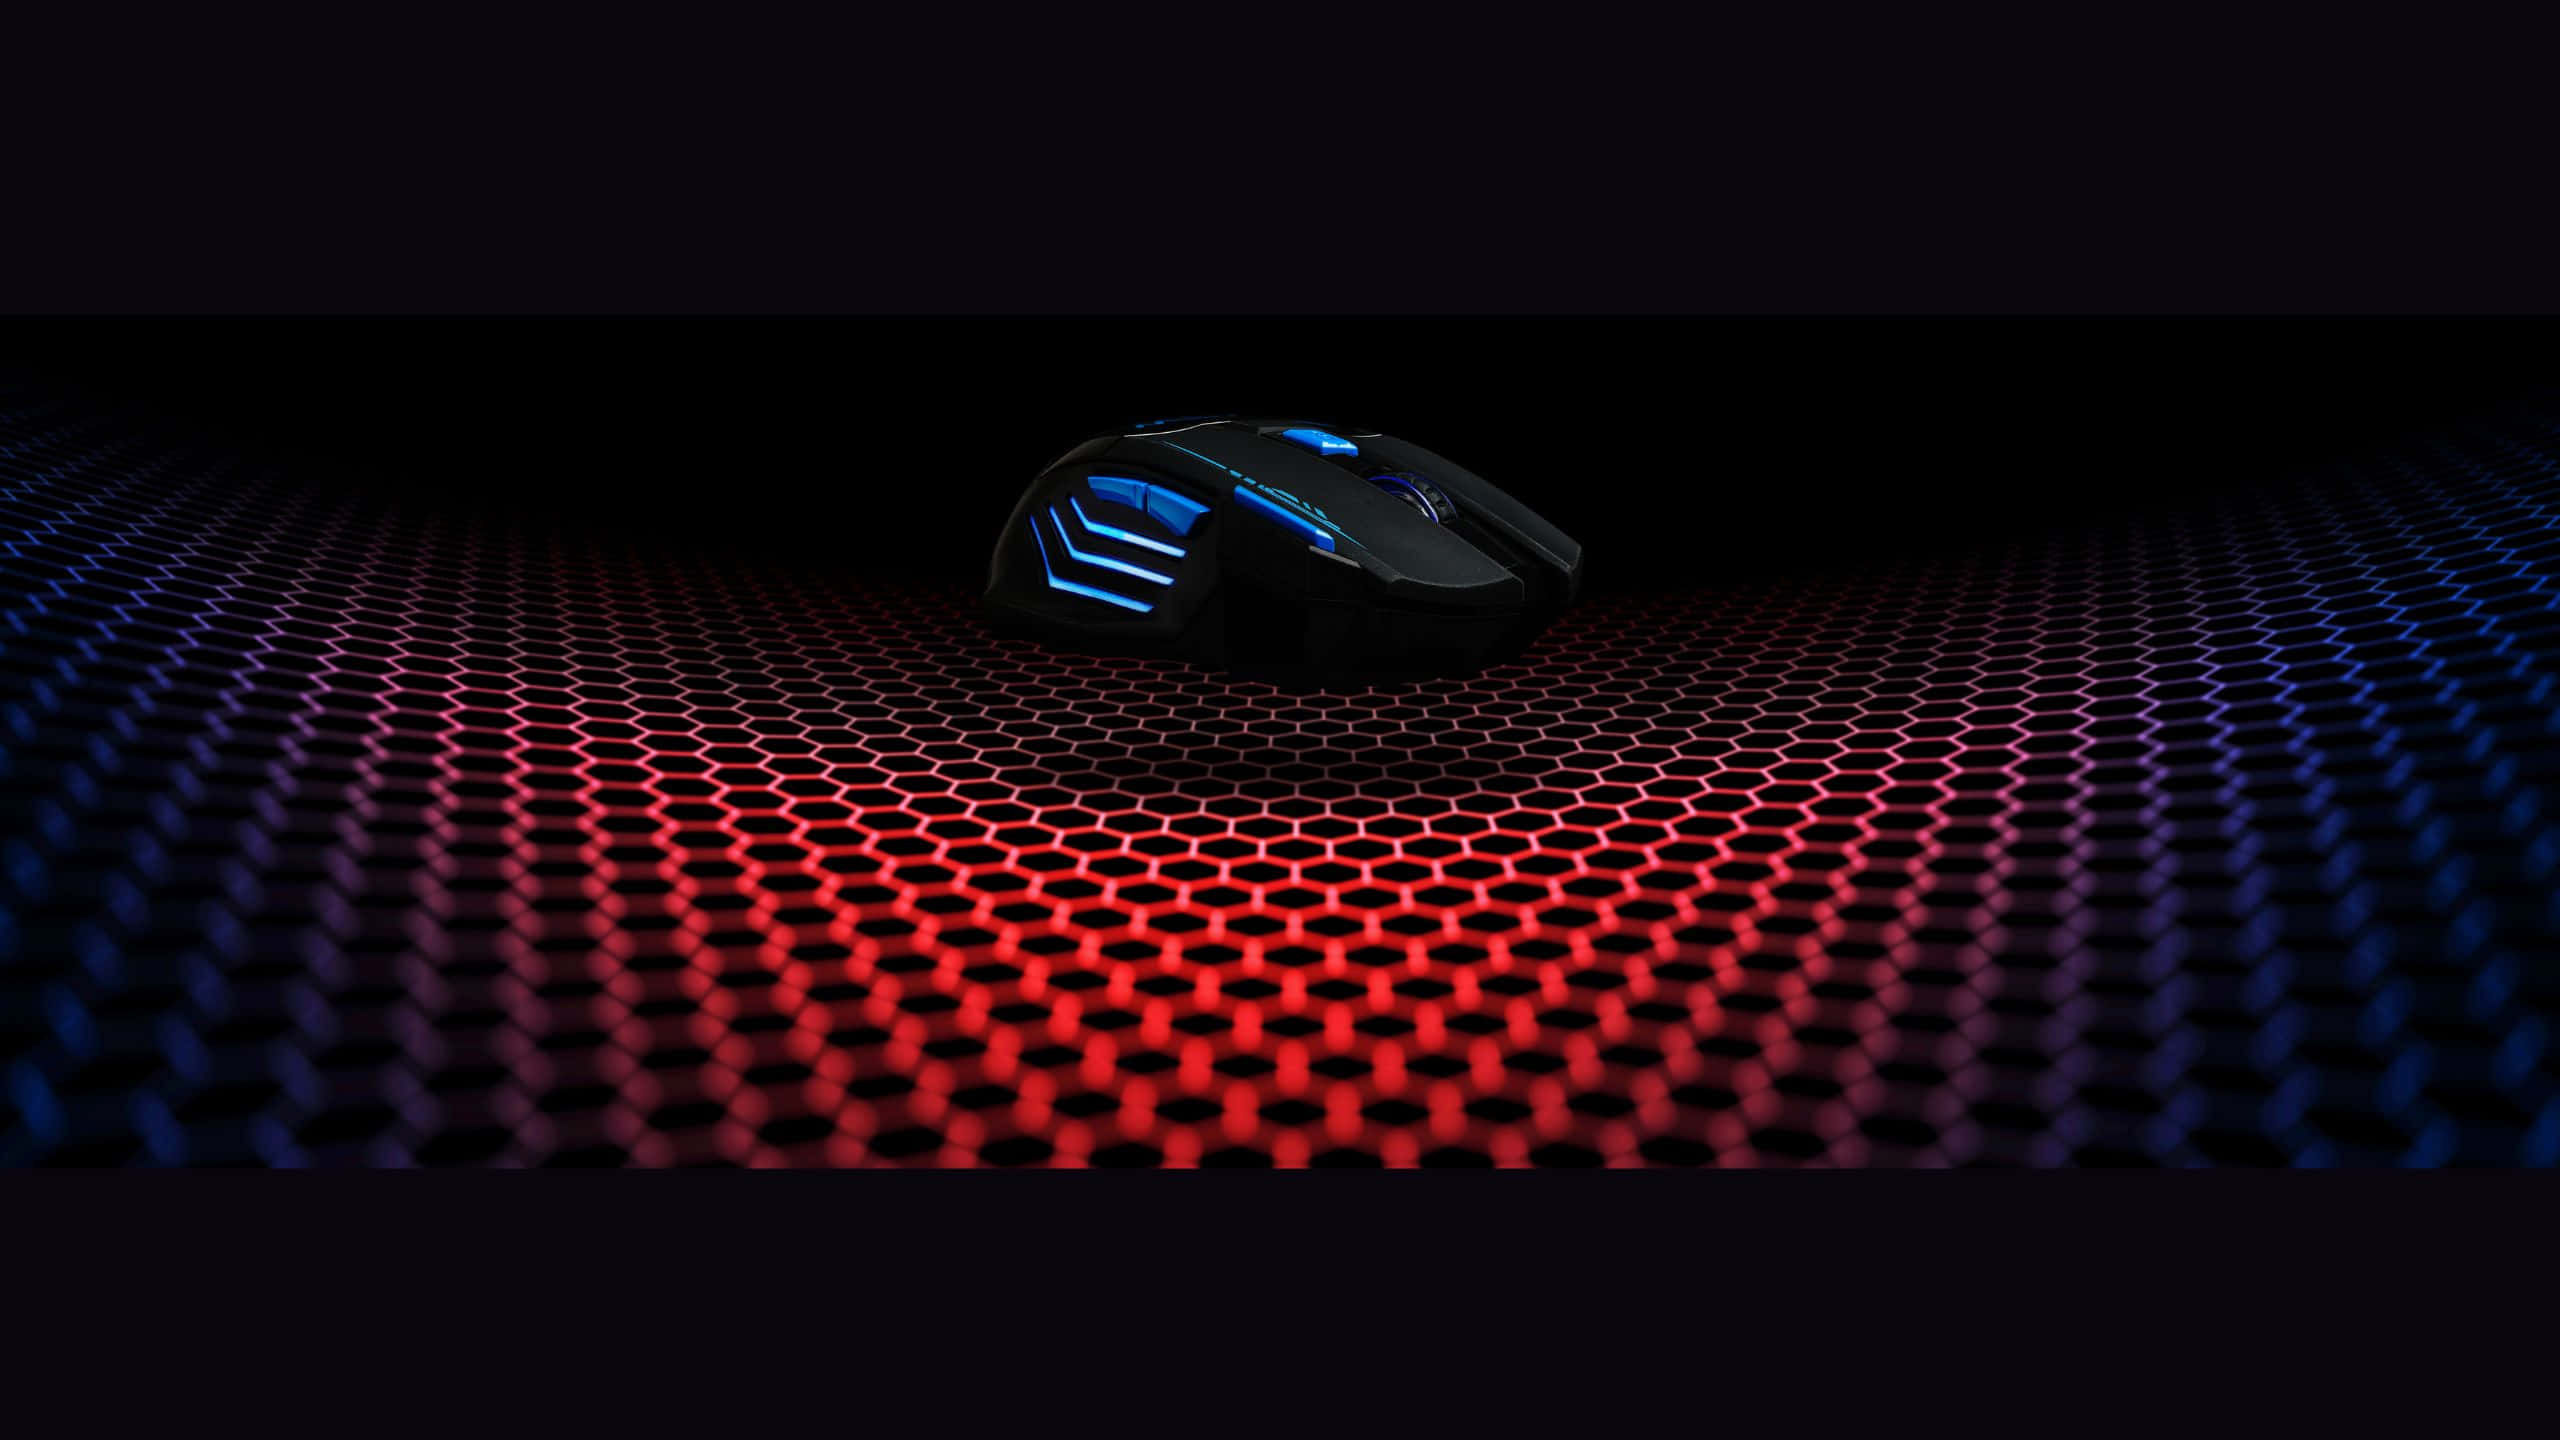 A Blue And Red Mouse On A Black Background